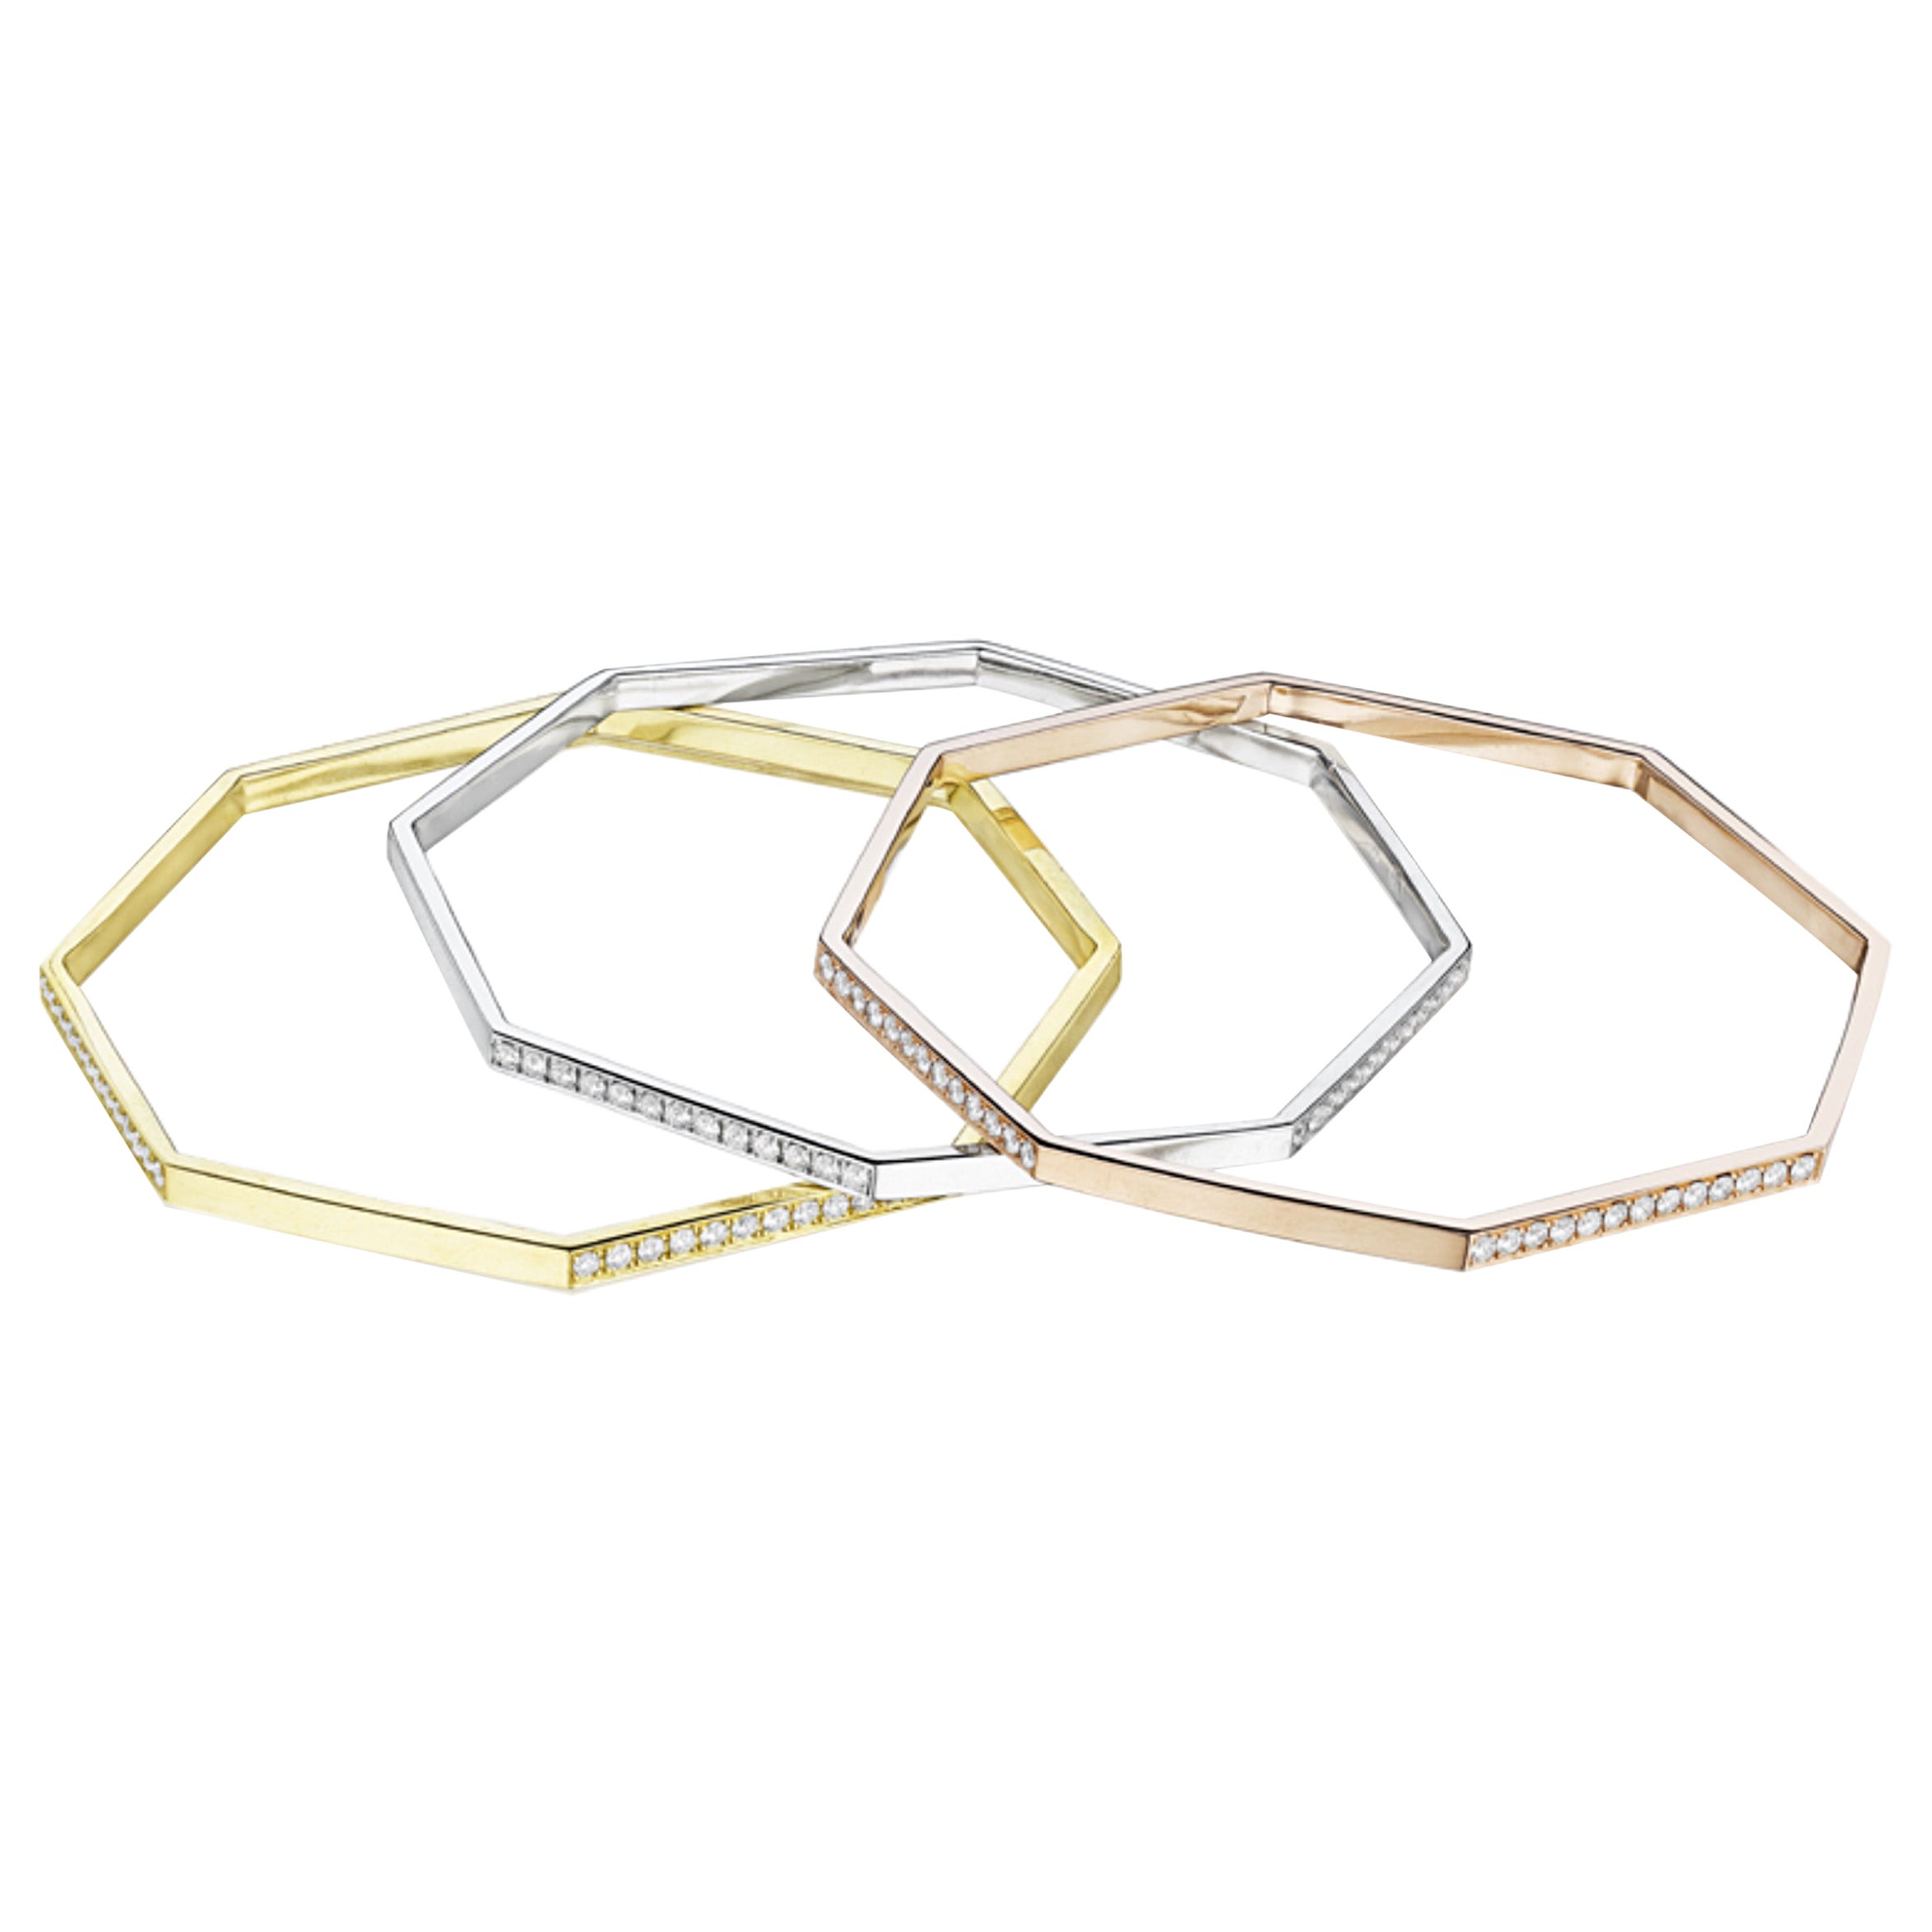 White Gold and Diamond Hexagon Bangle by MadStone